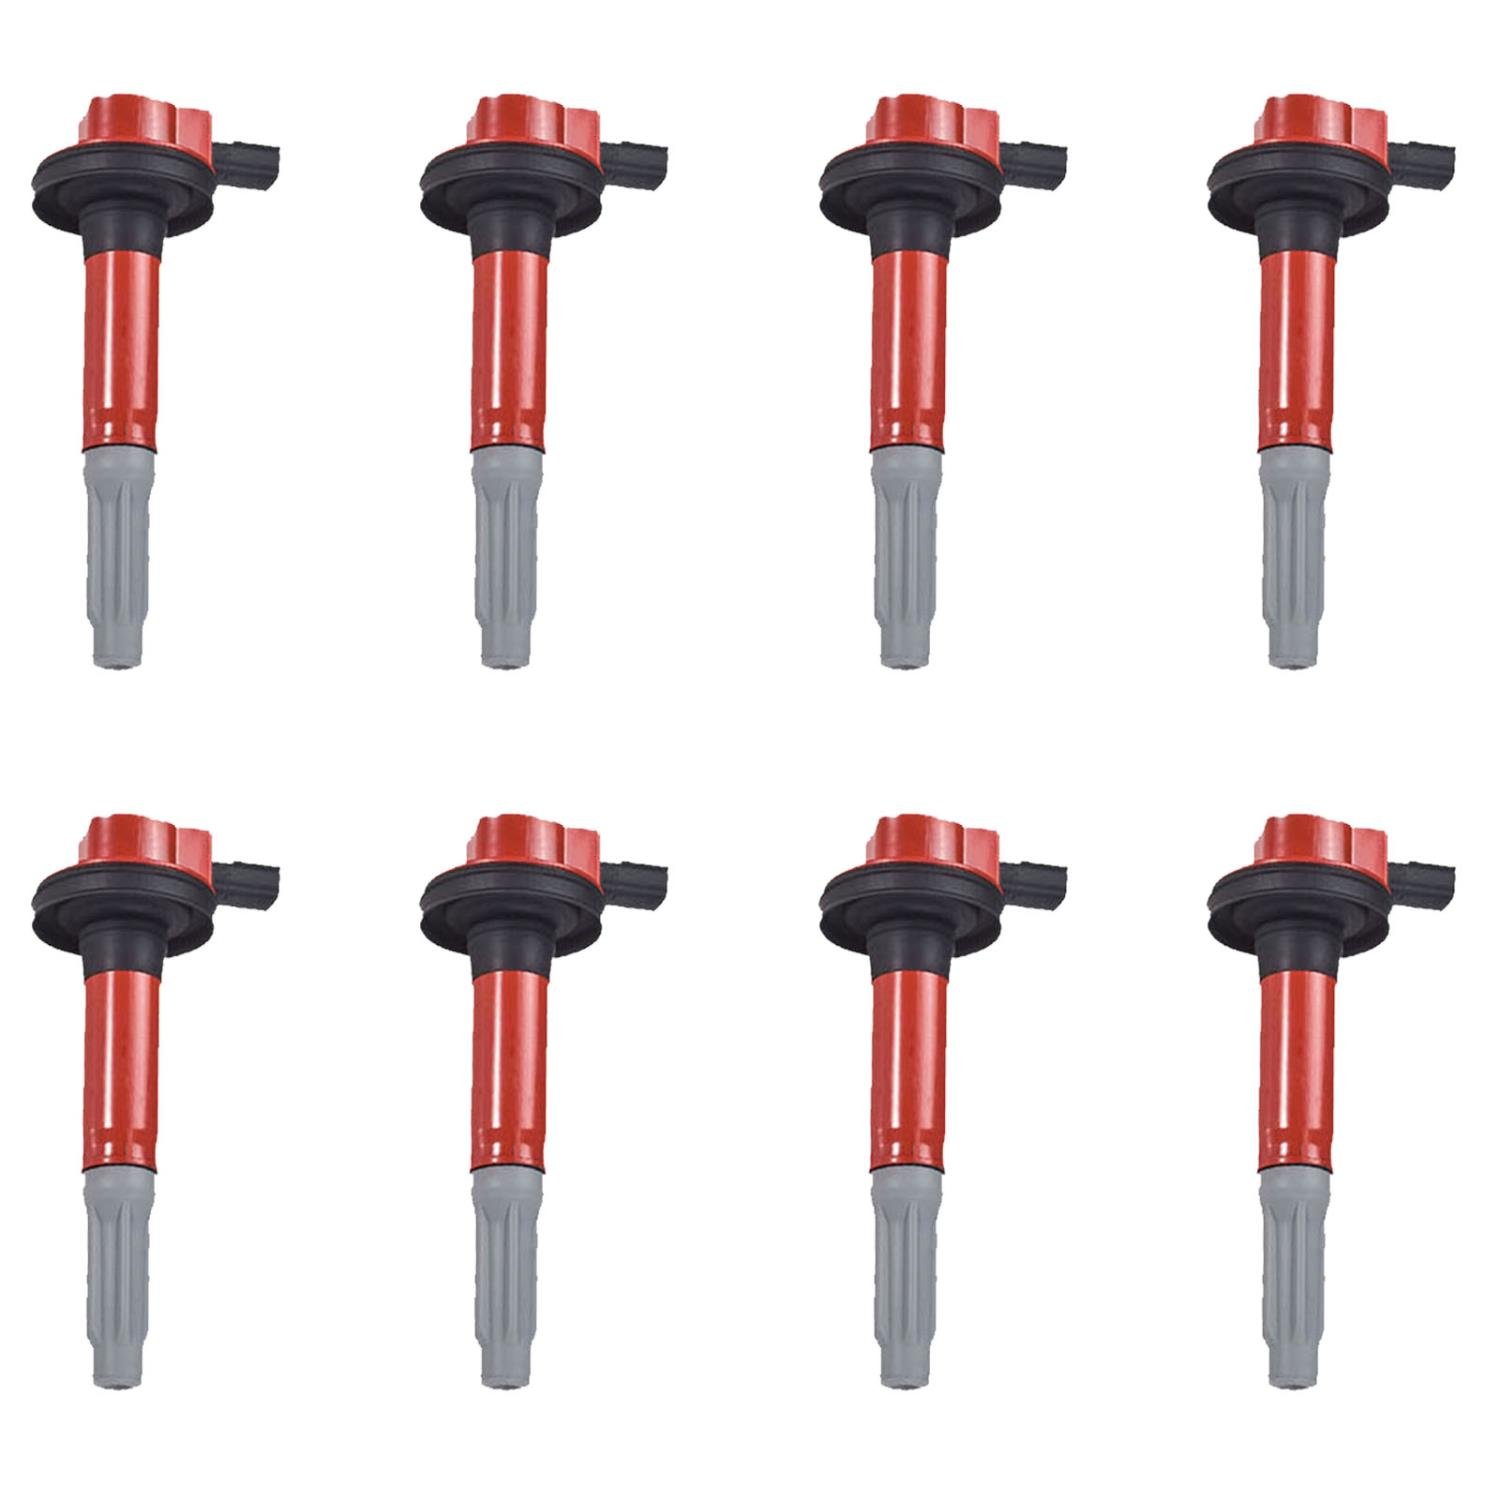 High-Performance Ignition Coils for Ford F-150 5.0L [Red]